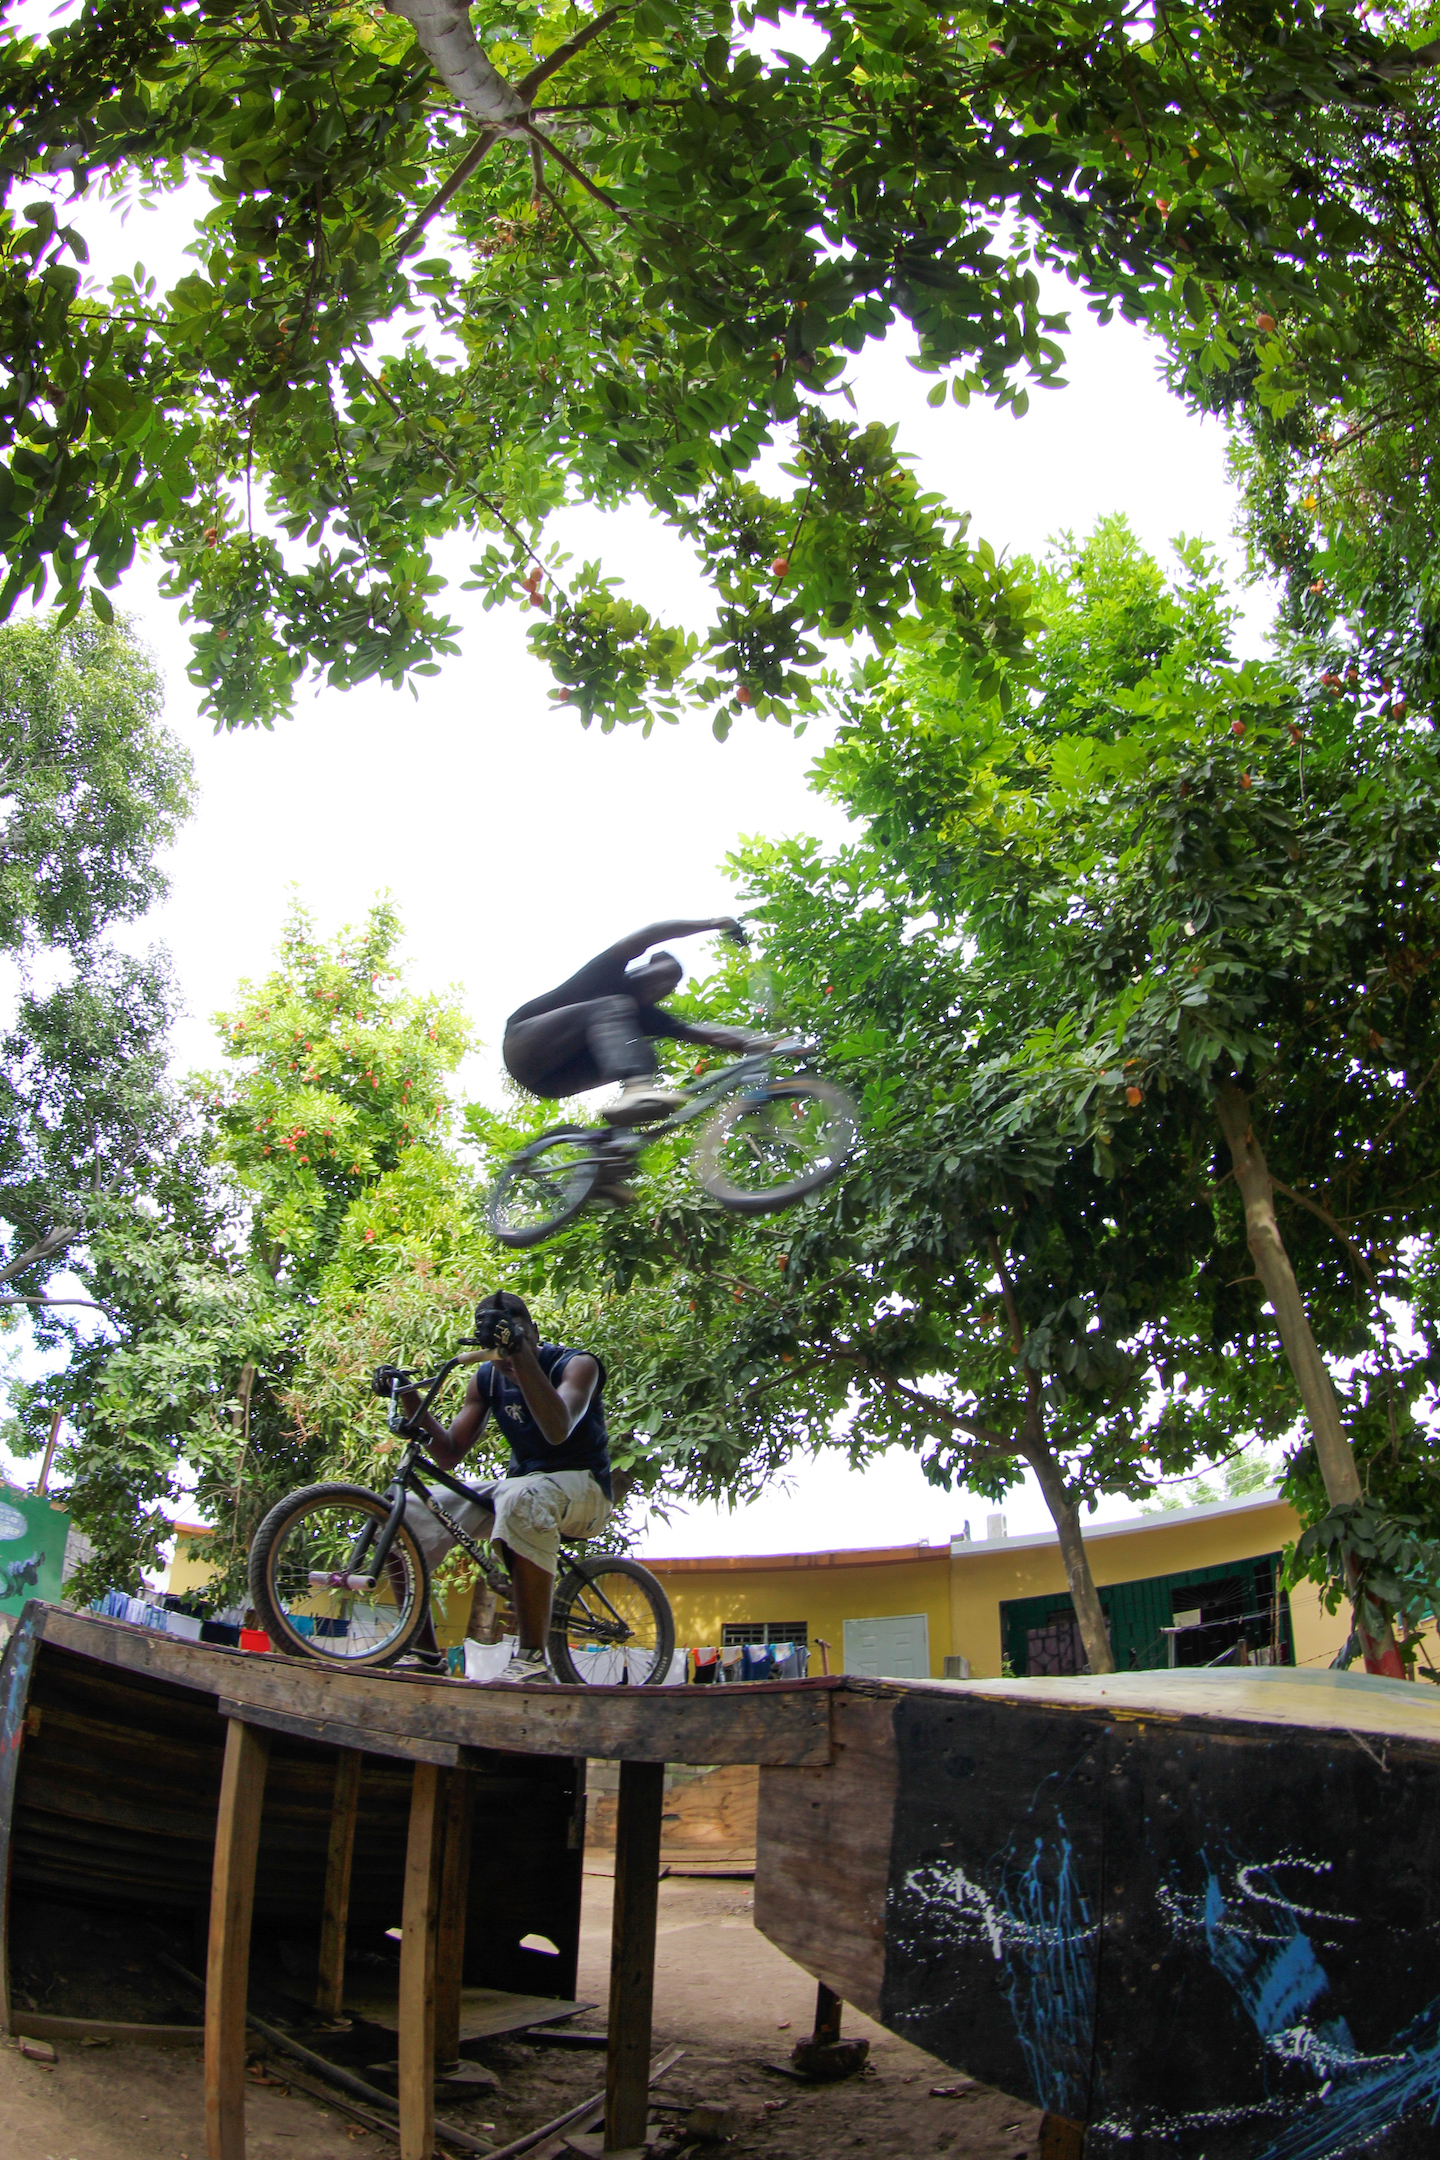 The blurred image of a man on a bike leaping over another man below on a bike.